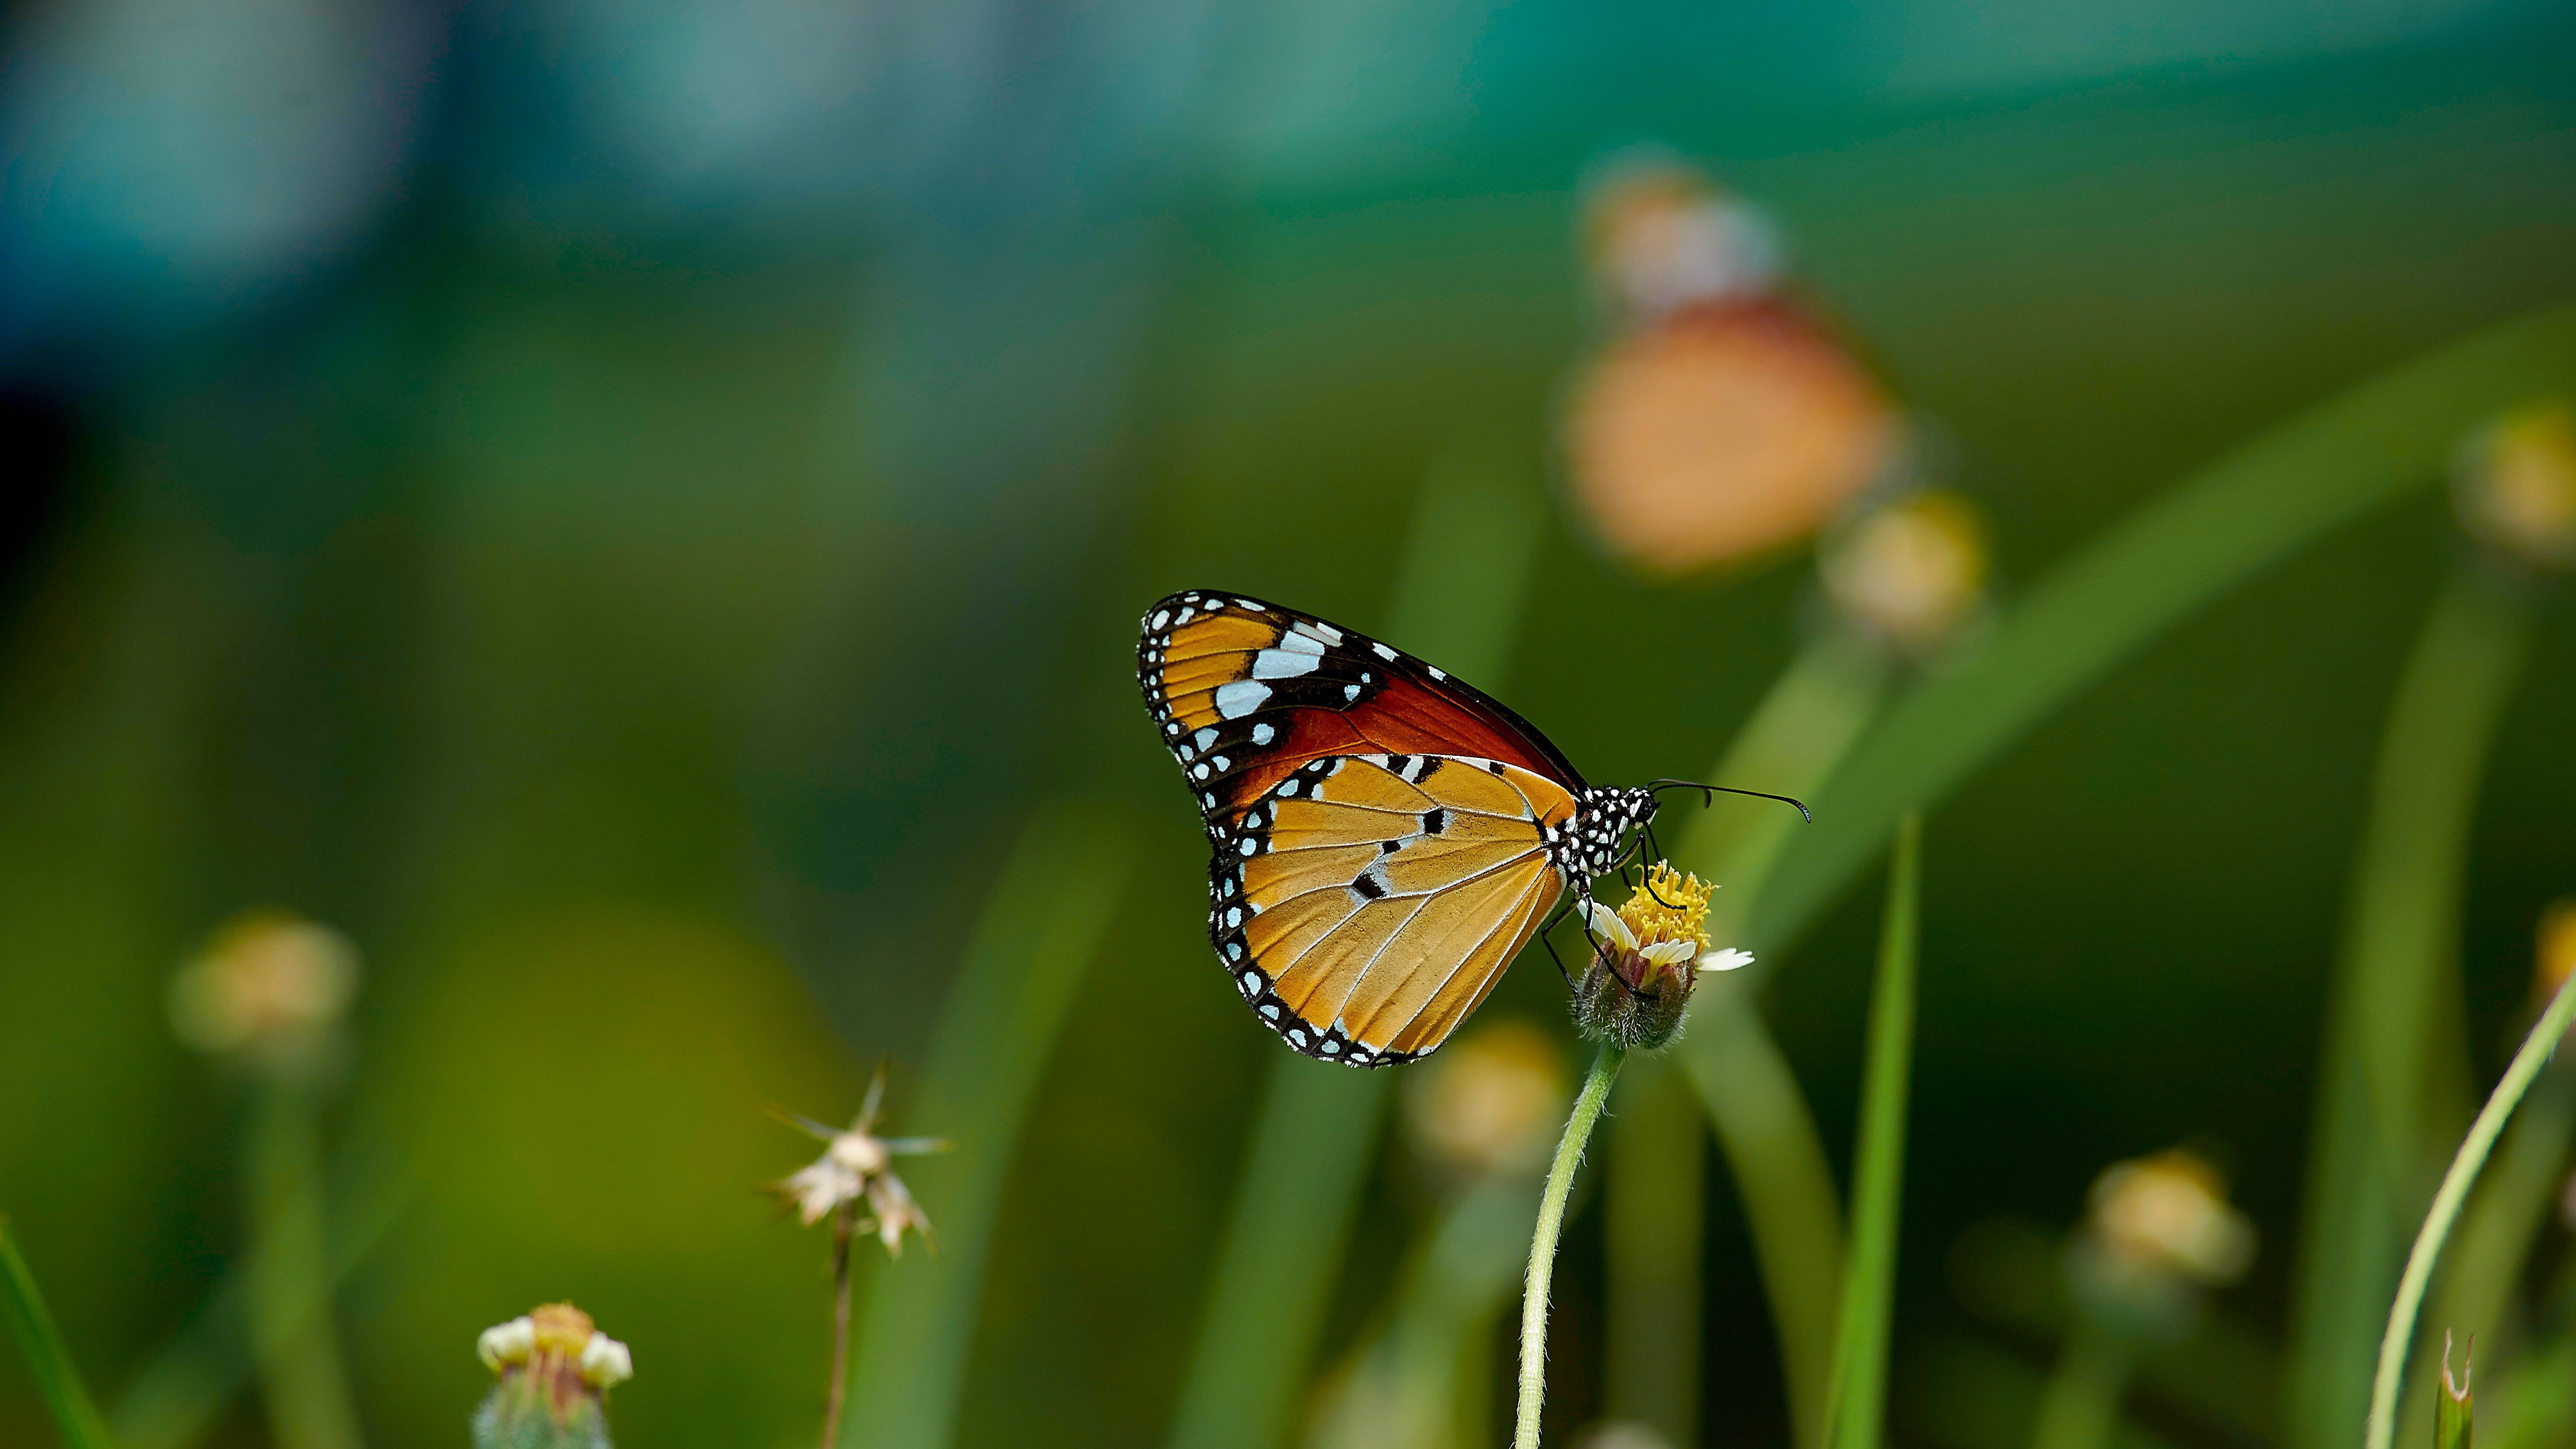 Monarch Butterfly perched on flower in selective focus photography